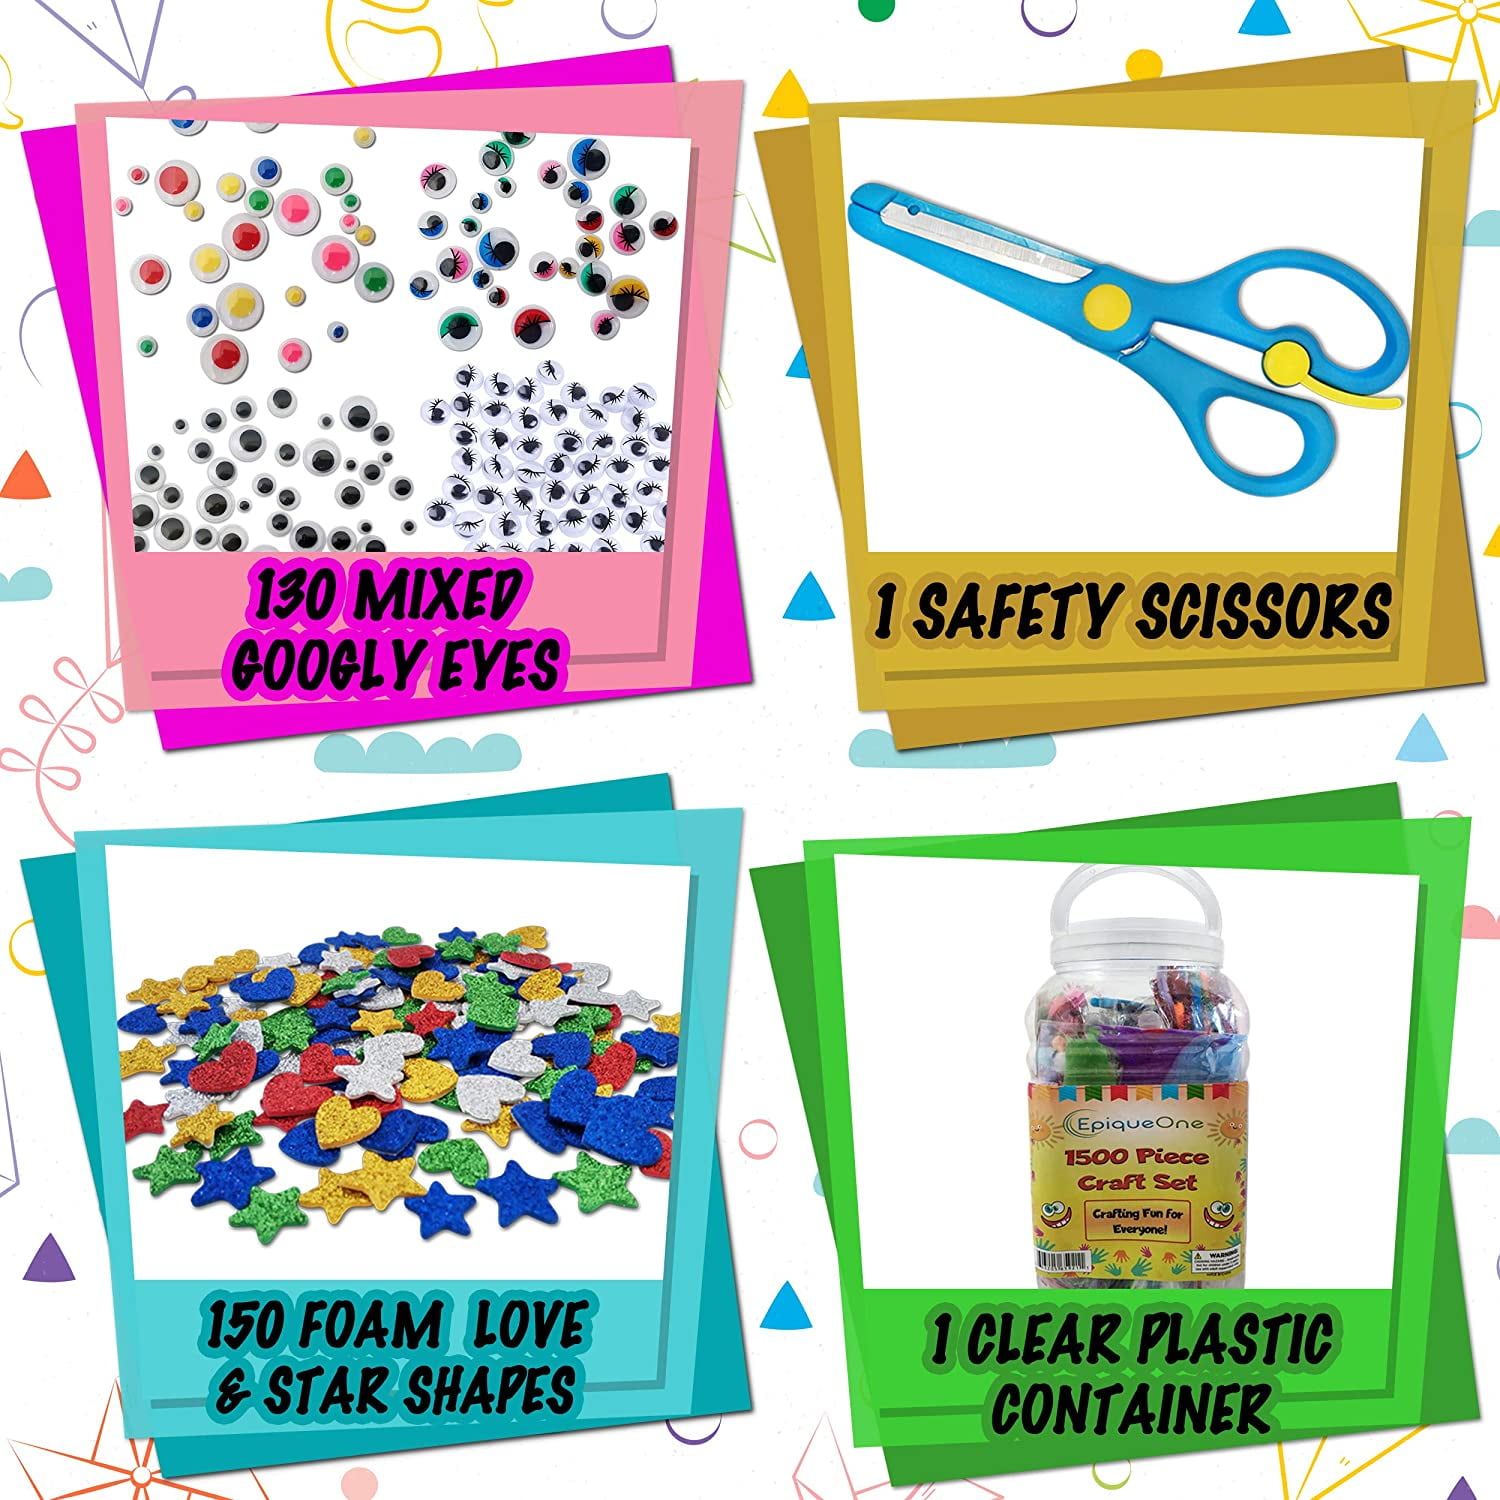  1500+ Pieces Arts and Crafts for Kids - Crafting Supplies for  Kids Ages 6-12 for Endless Hours of Fun - As a Gift Ideas Kids Craft Kit  Will Make Kids Happy 